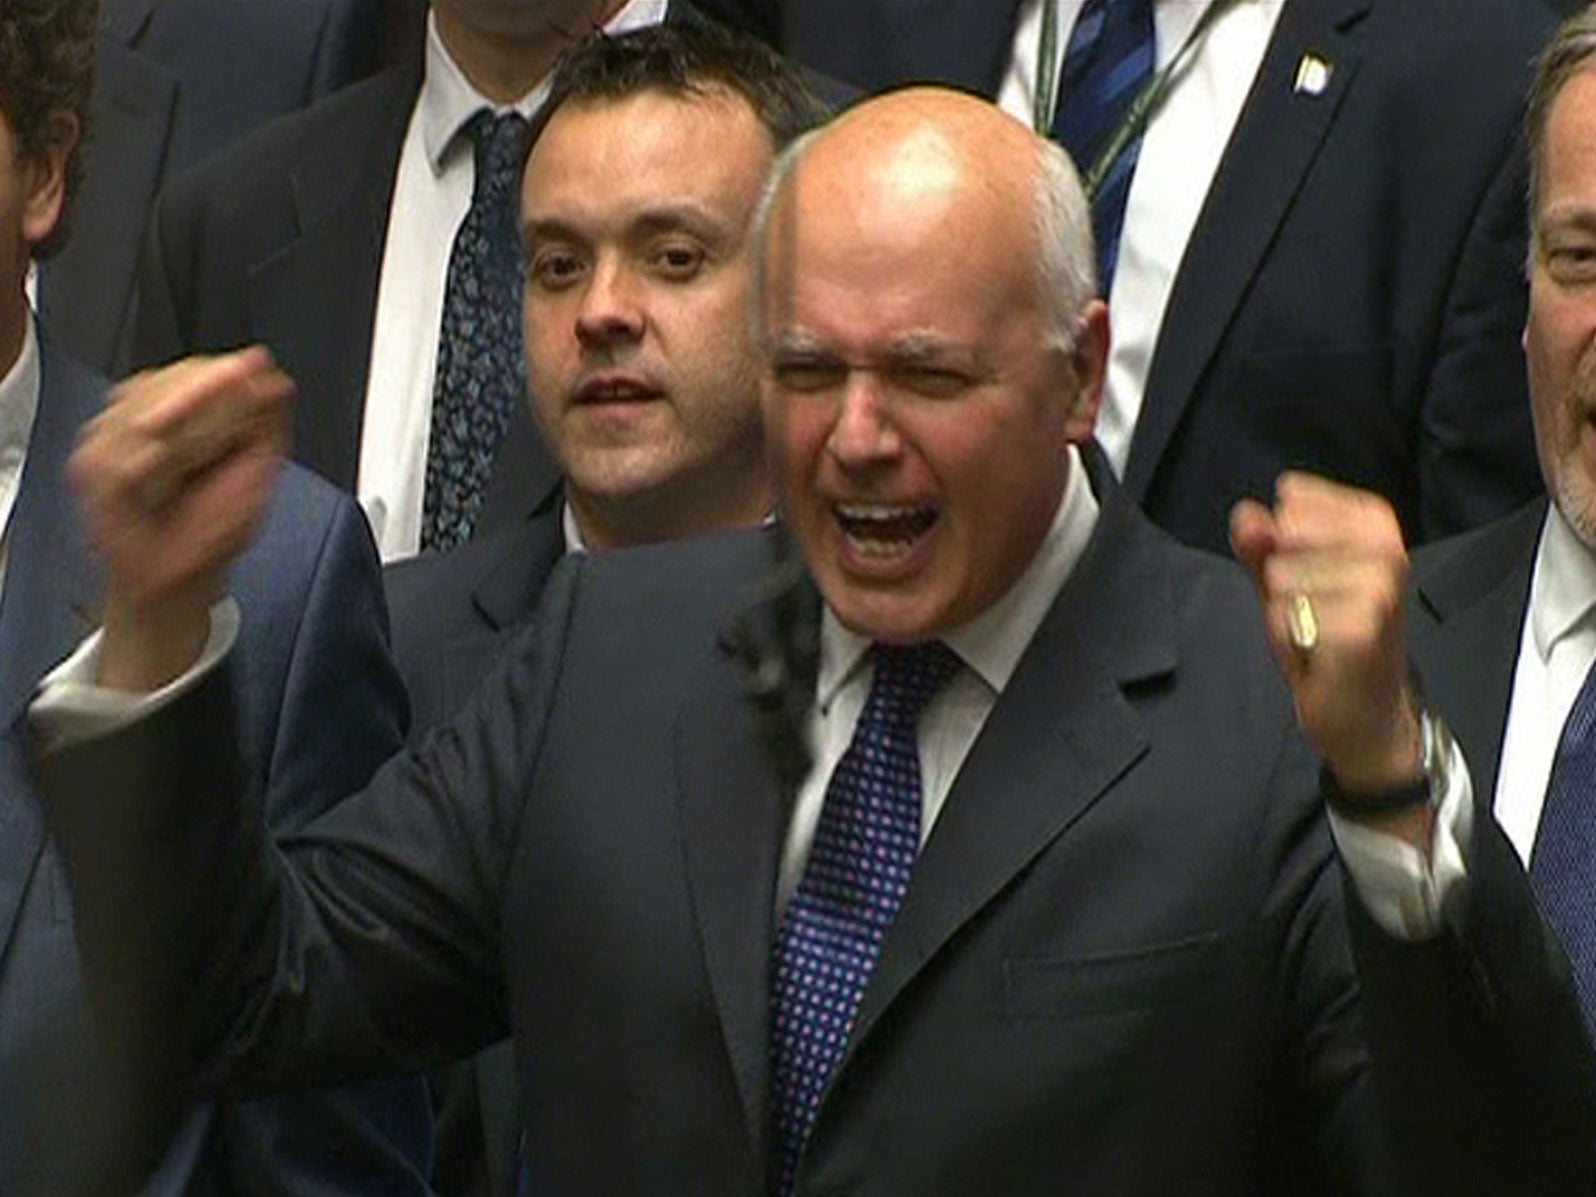 Works and Pensions Secretary Iain Duncan Smith punches the air as he listens to Chancellor of the Exchequer George Osborne deliver his Budget statement to the House of Commons, London.